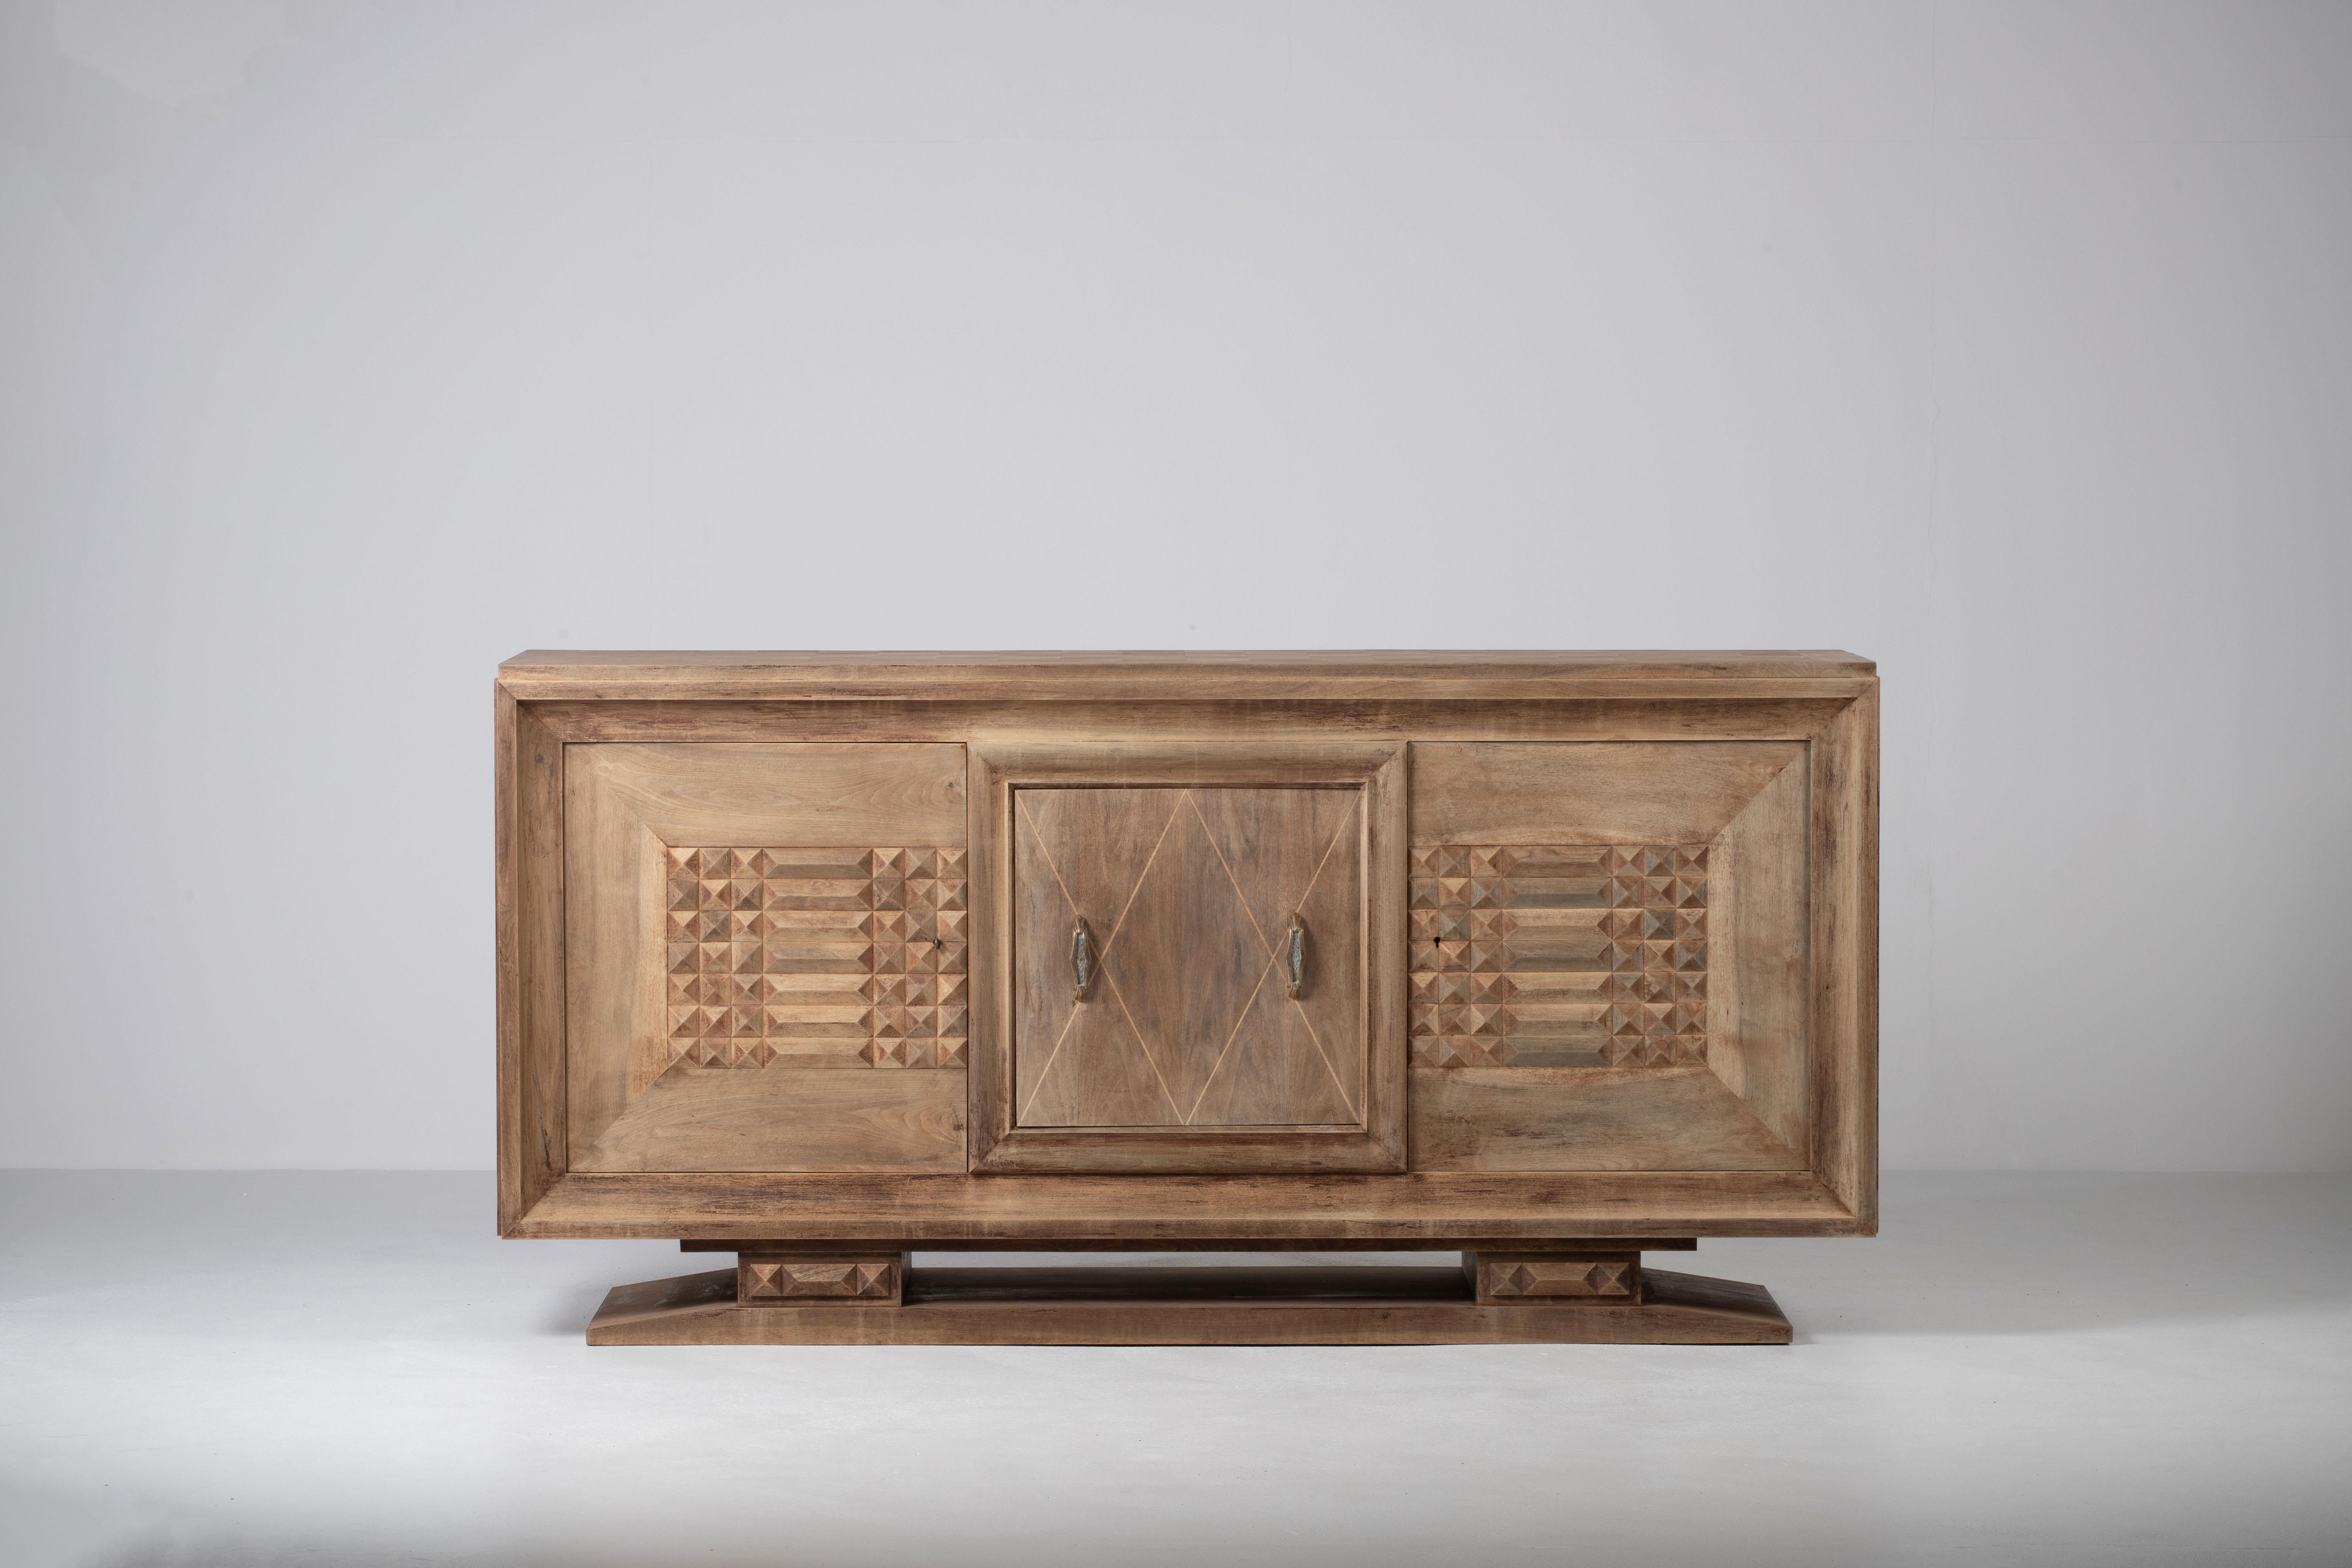 Bleached Art Deco Solid Oak Sideboard with Geometric Details, France, 1940s For Sale 12